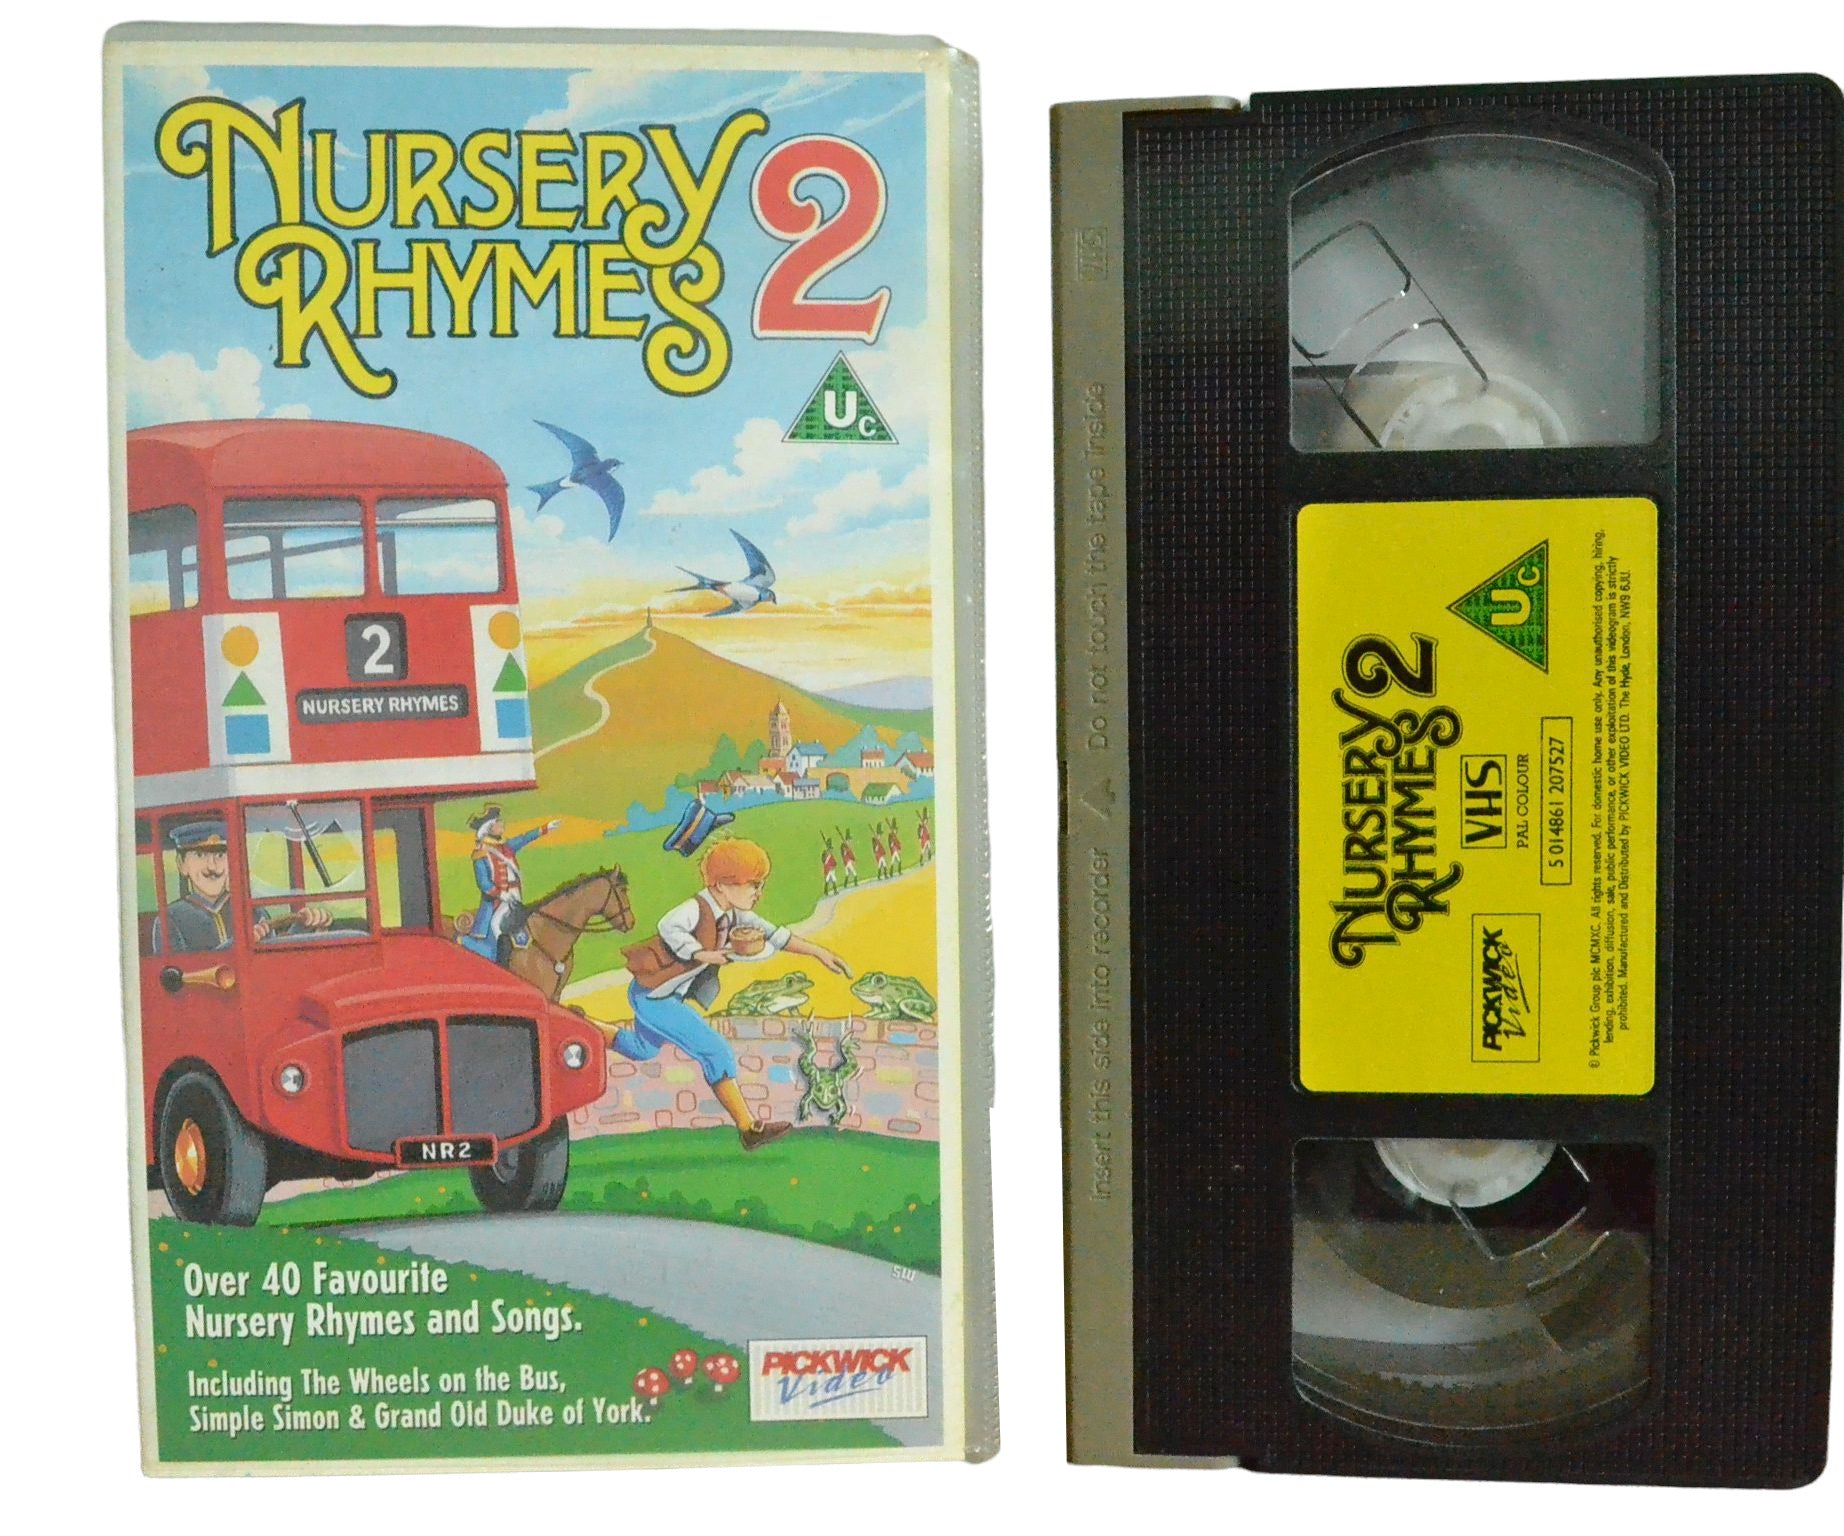 Nursery Rhymes 2 (Over 40 Favourite Nursery Rhymes and Songs) - Pickwick Video - Children's - Pal VHS-